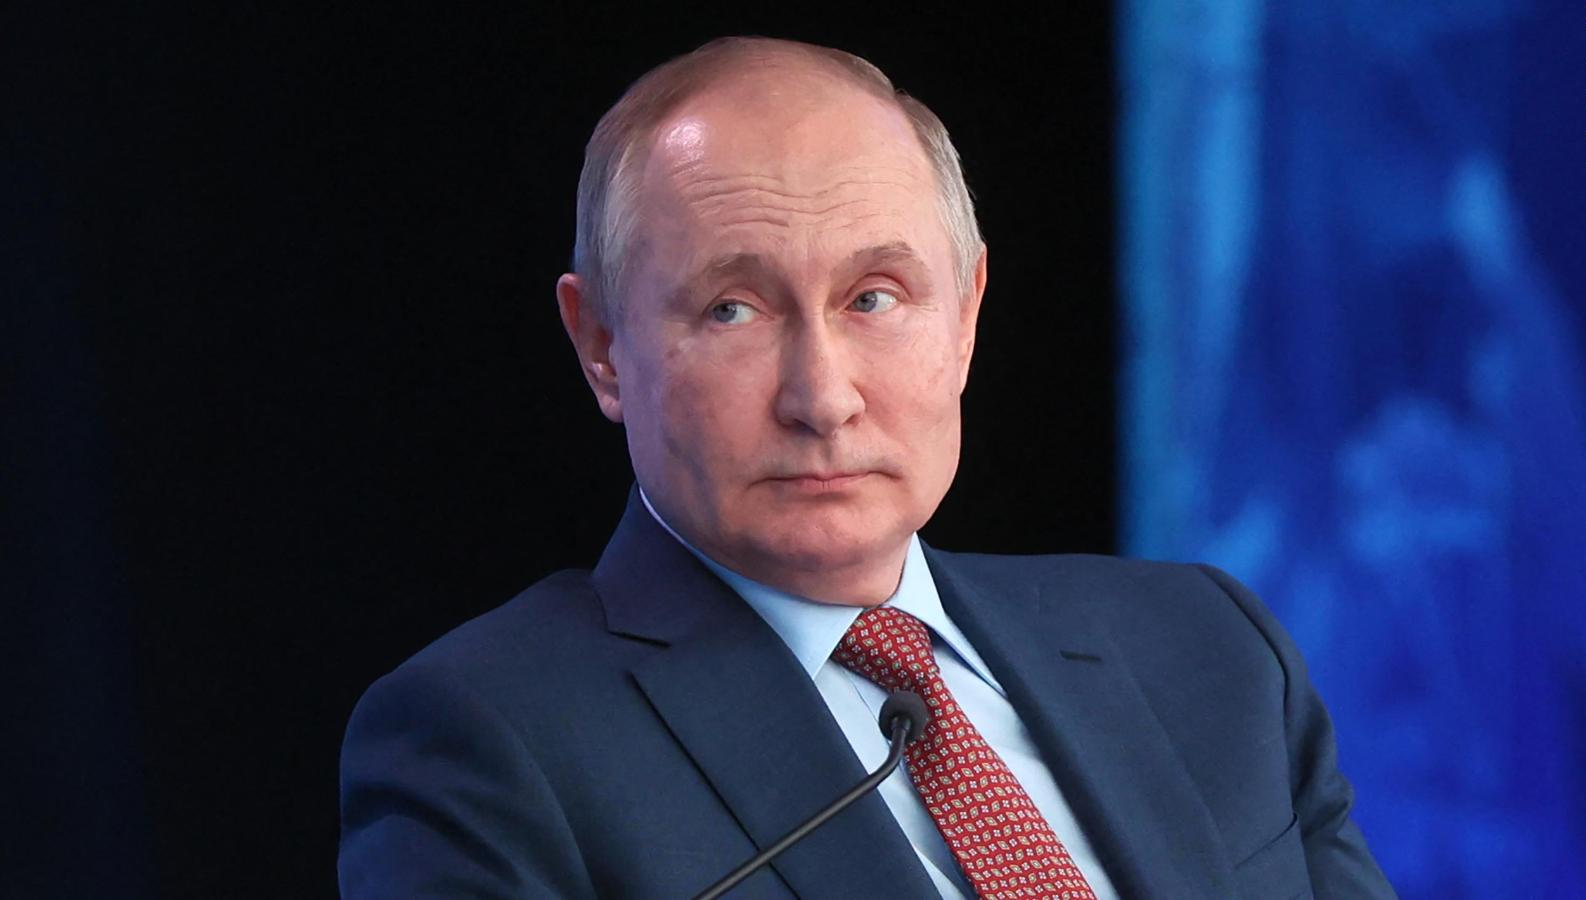 Putin stresses the importance more than ever of the unity of Russians